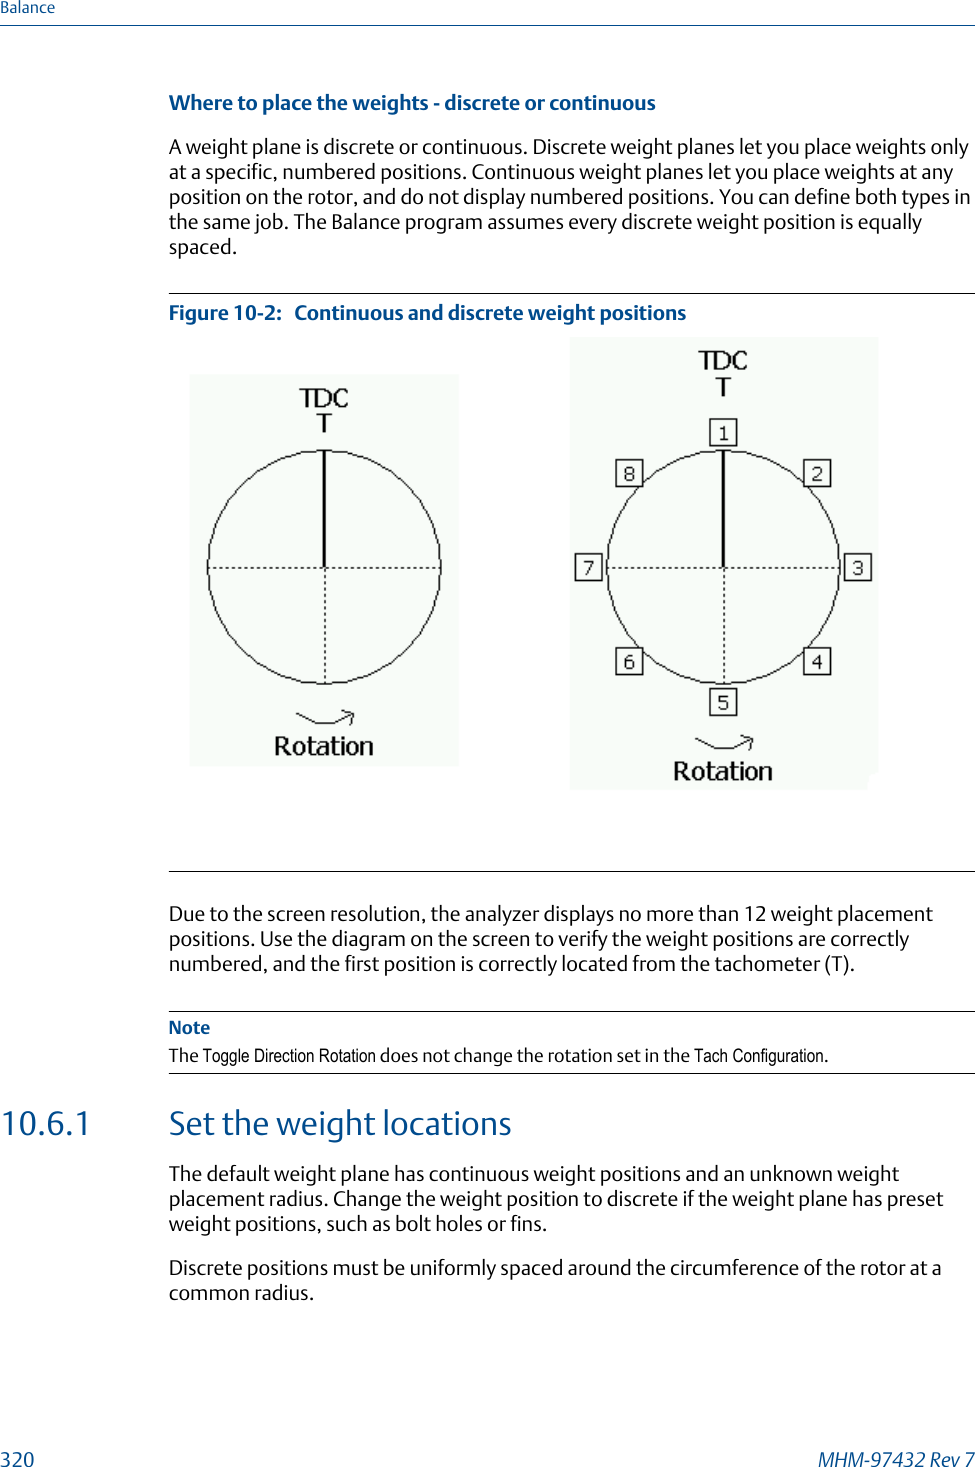 Where to place the weights - discrete or continuousA weight plane is discrete or continuous. Discrete weight planes let you place weights onlyat a specific, numbered positions. Continuous weight planes let you place weights at anyposition on the rotor, and do not display numbered positions. You can define both types inthe same job. The Balance program assumes every discrete weight position is equallyspaced.Continuous and discrete weight positionsFigure 10-2:   Due to the screen resolution, the analyzer displays no more than 12 weight placementpositions. Use the diagram on the screen to verify the weight positions are correctlynumbered, and the first position is correctly located from the tachometer (T).NoteThe Toggle Direction Rotation does not change the rotation set in the Tach Configuration.10.6.1 Set the weight locationsThe default weight plane has continuous weight positions and an unknown weightplacement radius. Change the weight position to discrete if the weight plane has presetweight positions, such as bolt holes or fins.Discrete positions must be uniformly spaced around the circumference of the rotor at acommon radius.Balance320 MHM-97432 Rev 7